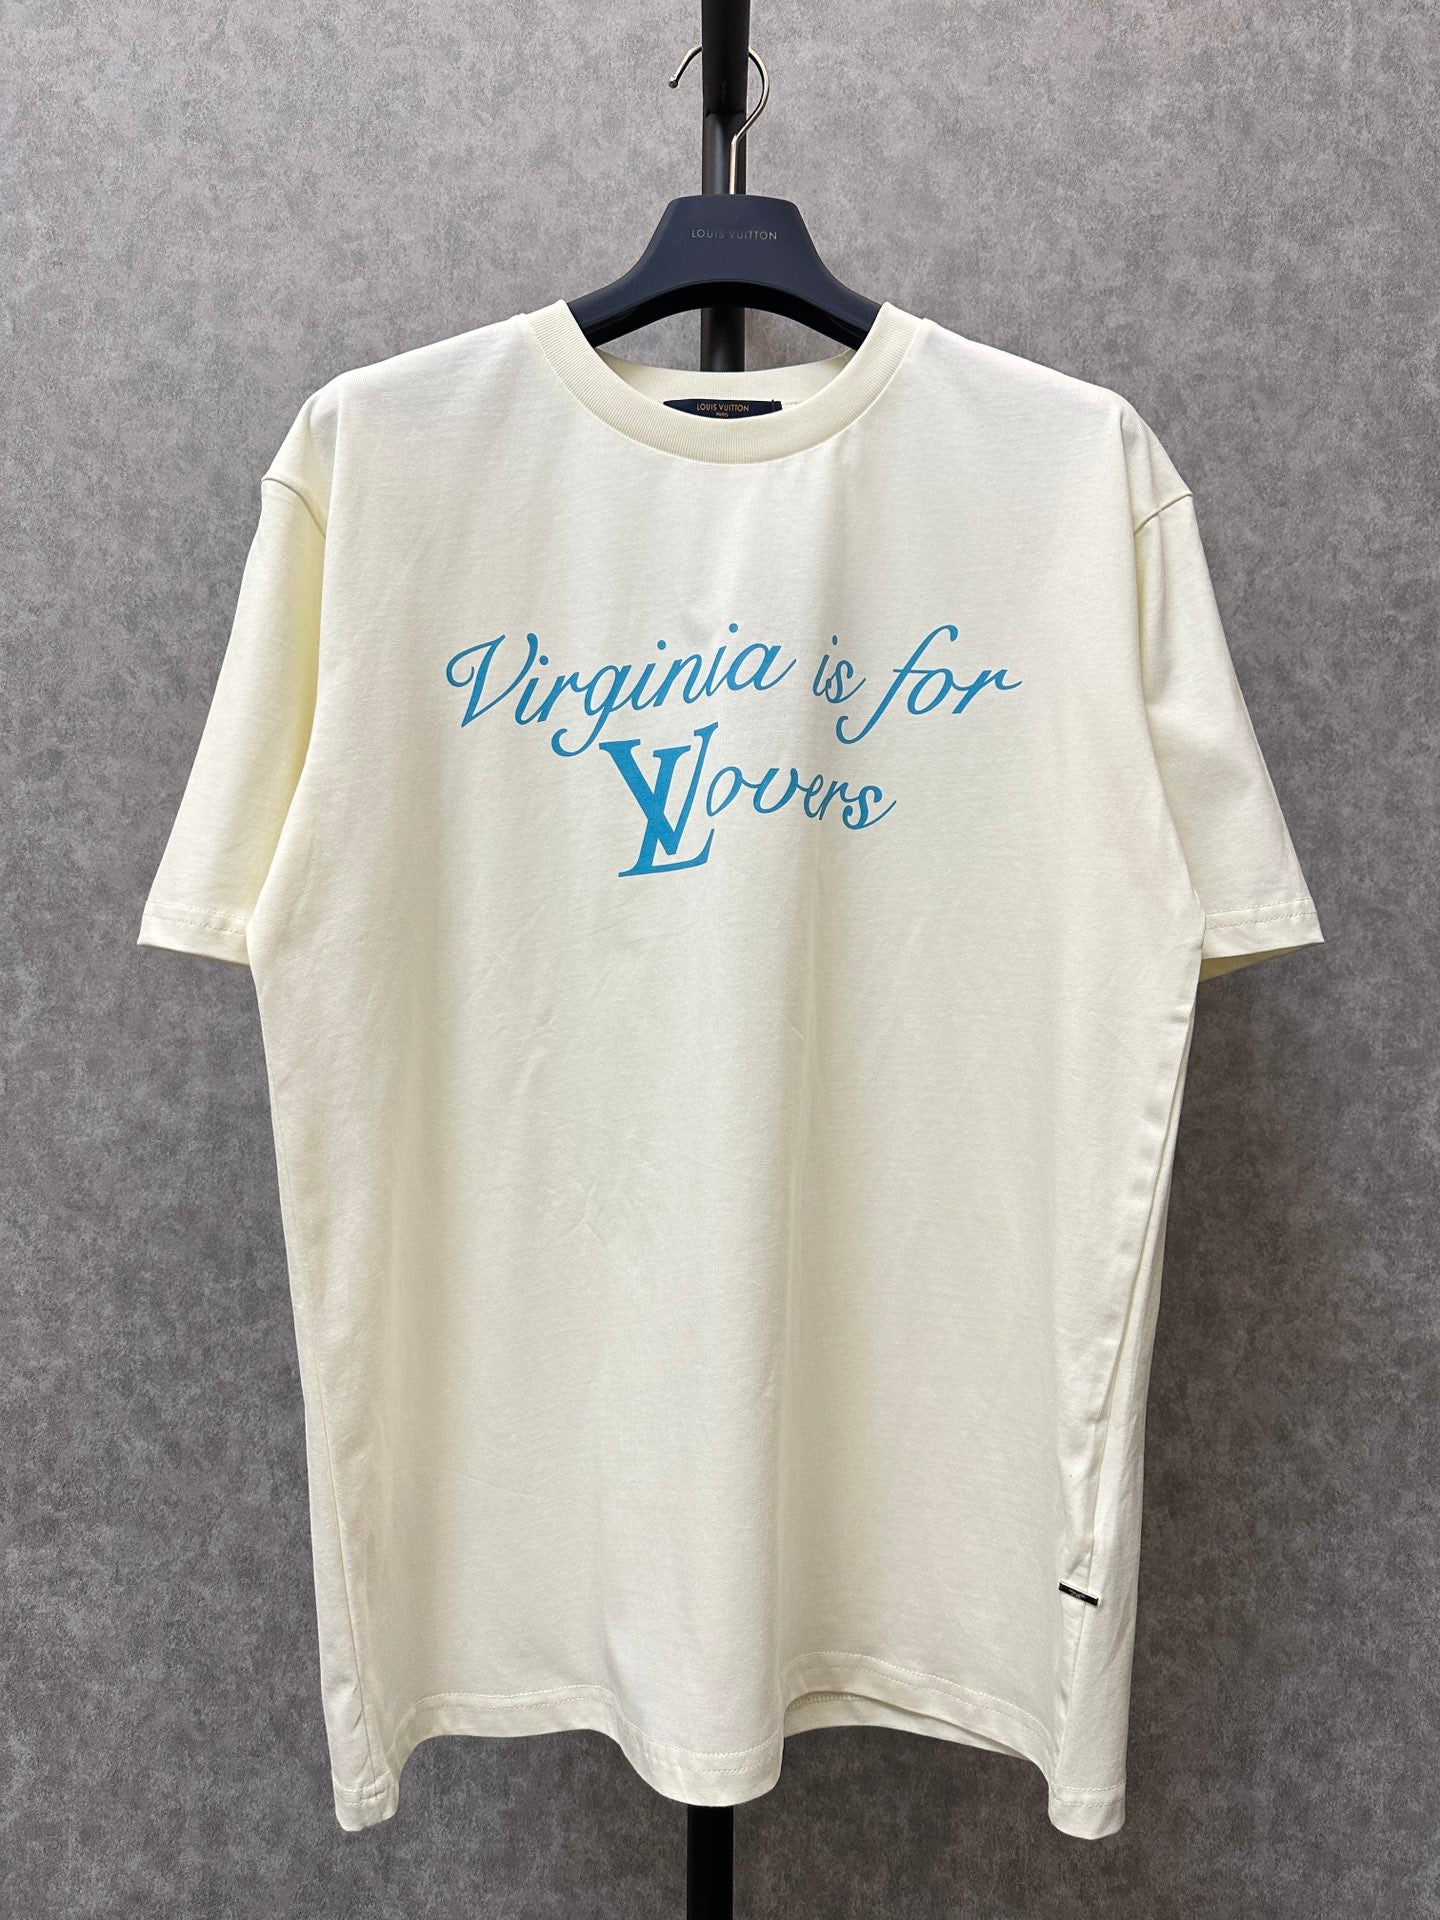 Louis Vuitton x Something in the Water VA Is For Lovers Printed T-shir –  NYSummerShop